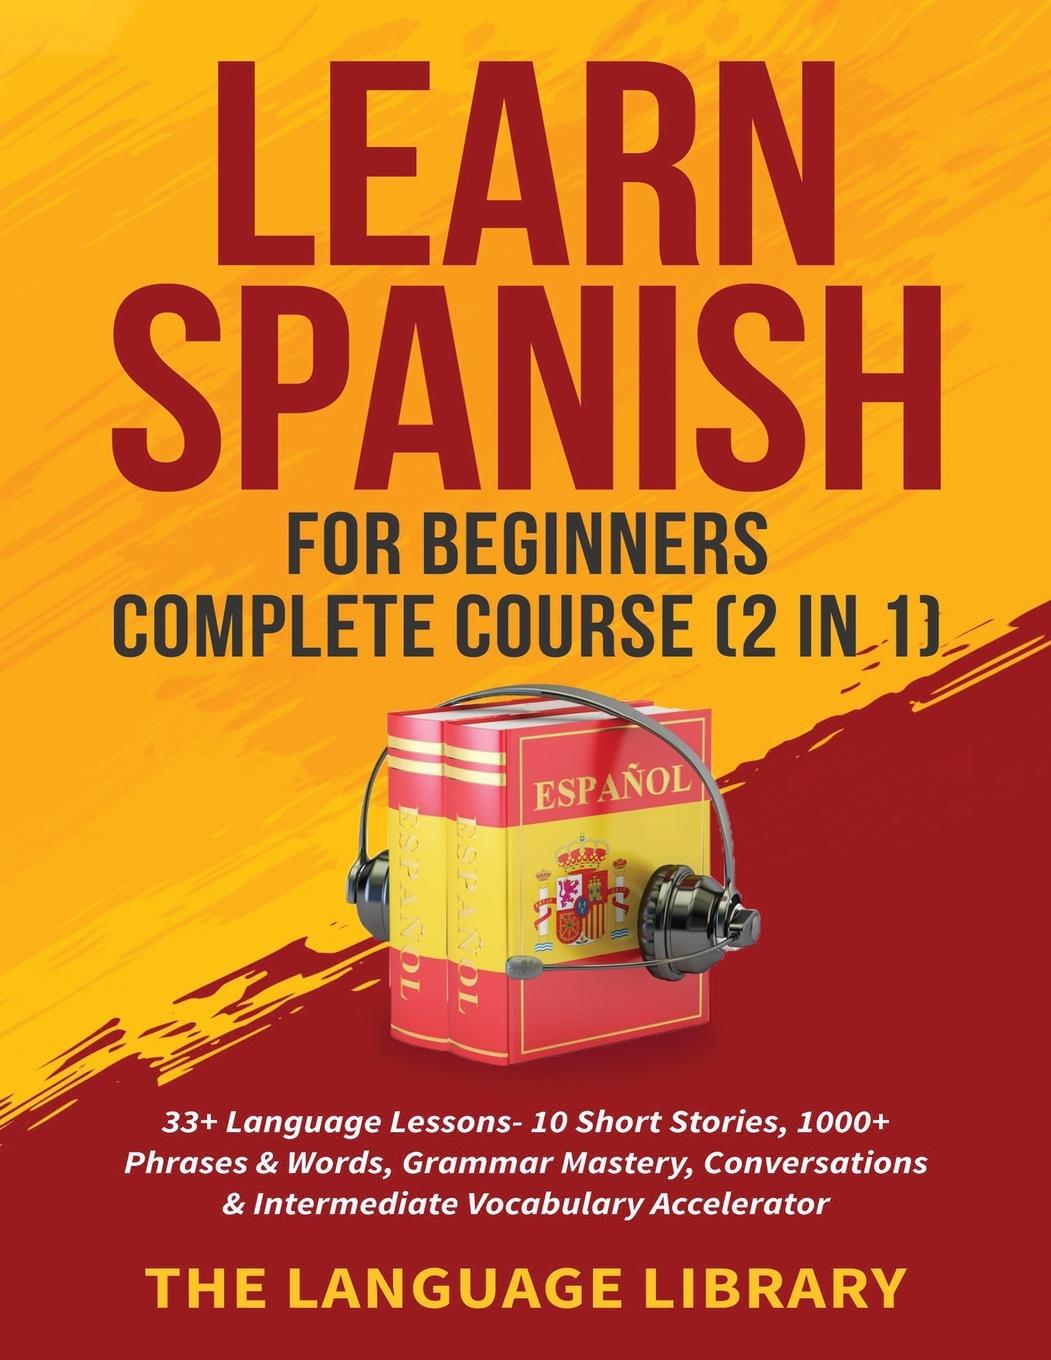 Book Learn Spanish For Beginners Complete Course (2 in 1) 